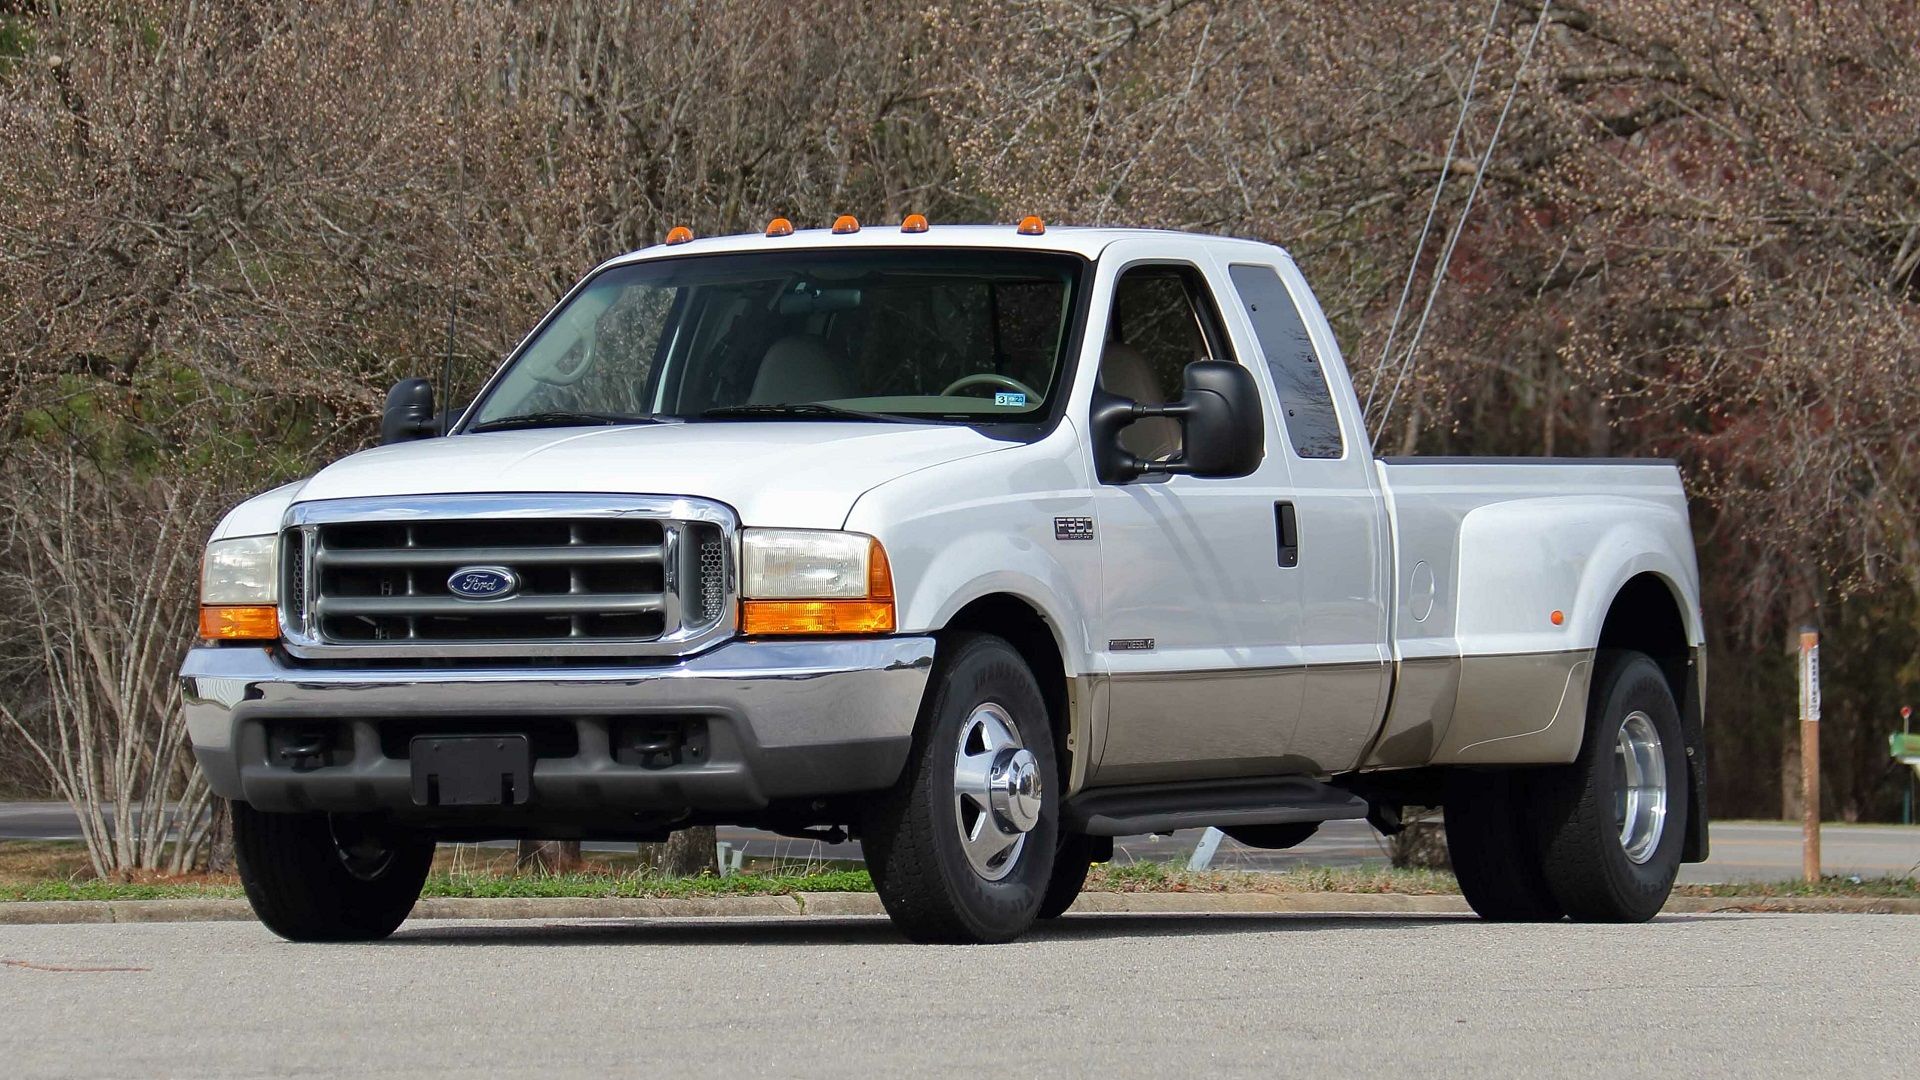 A parked 2000 Ford F-350